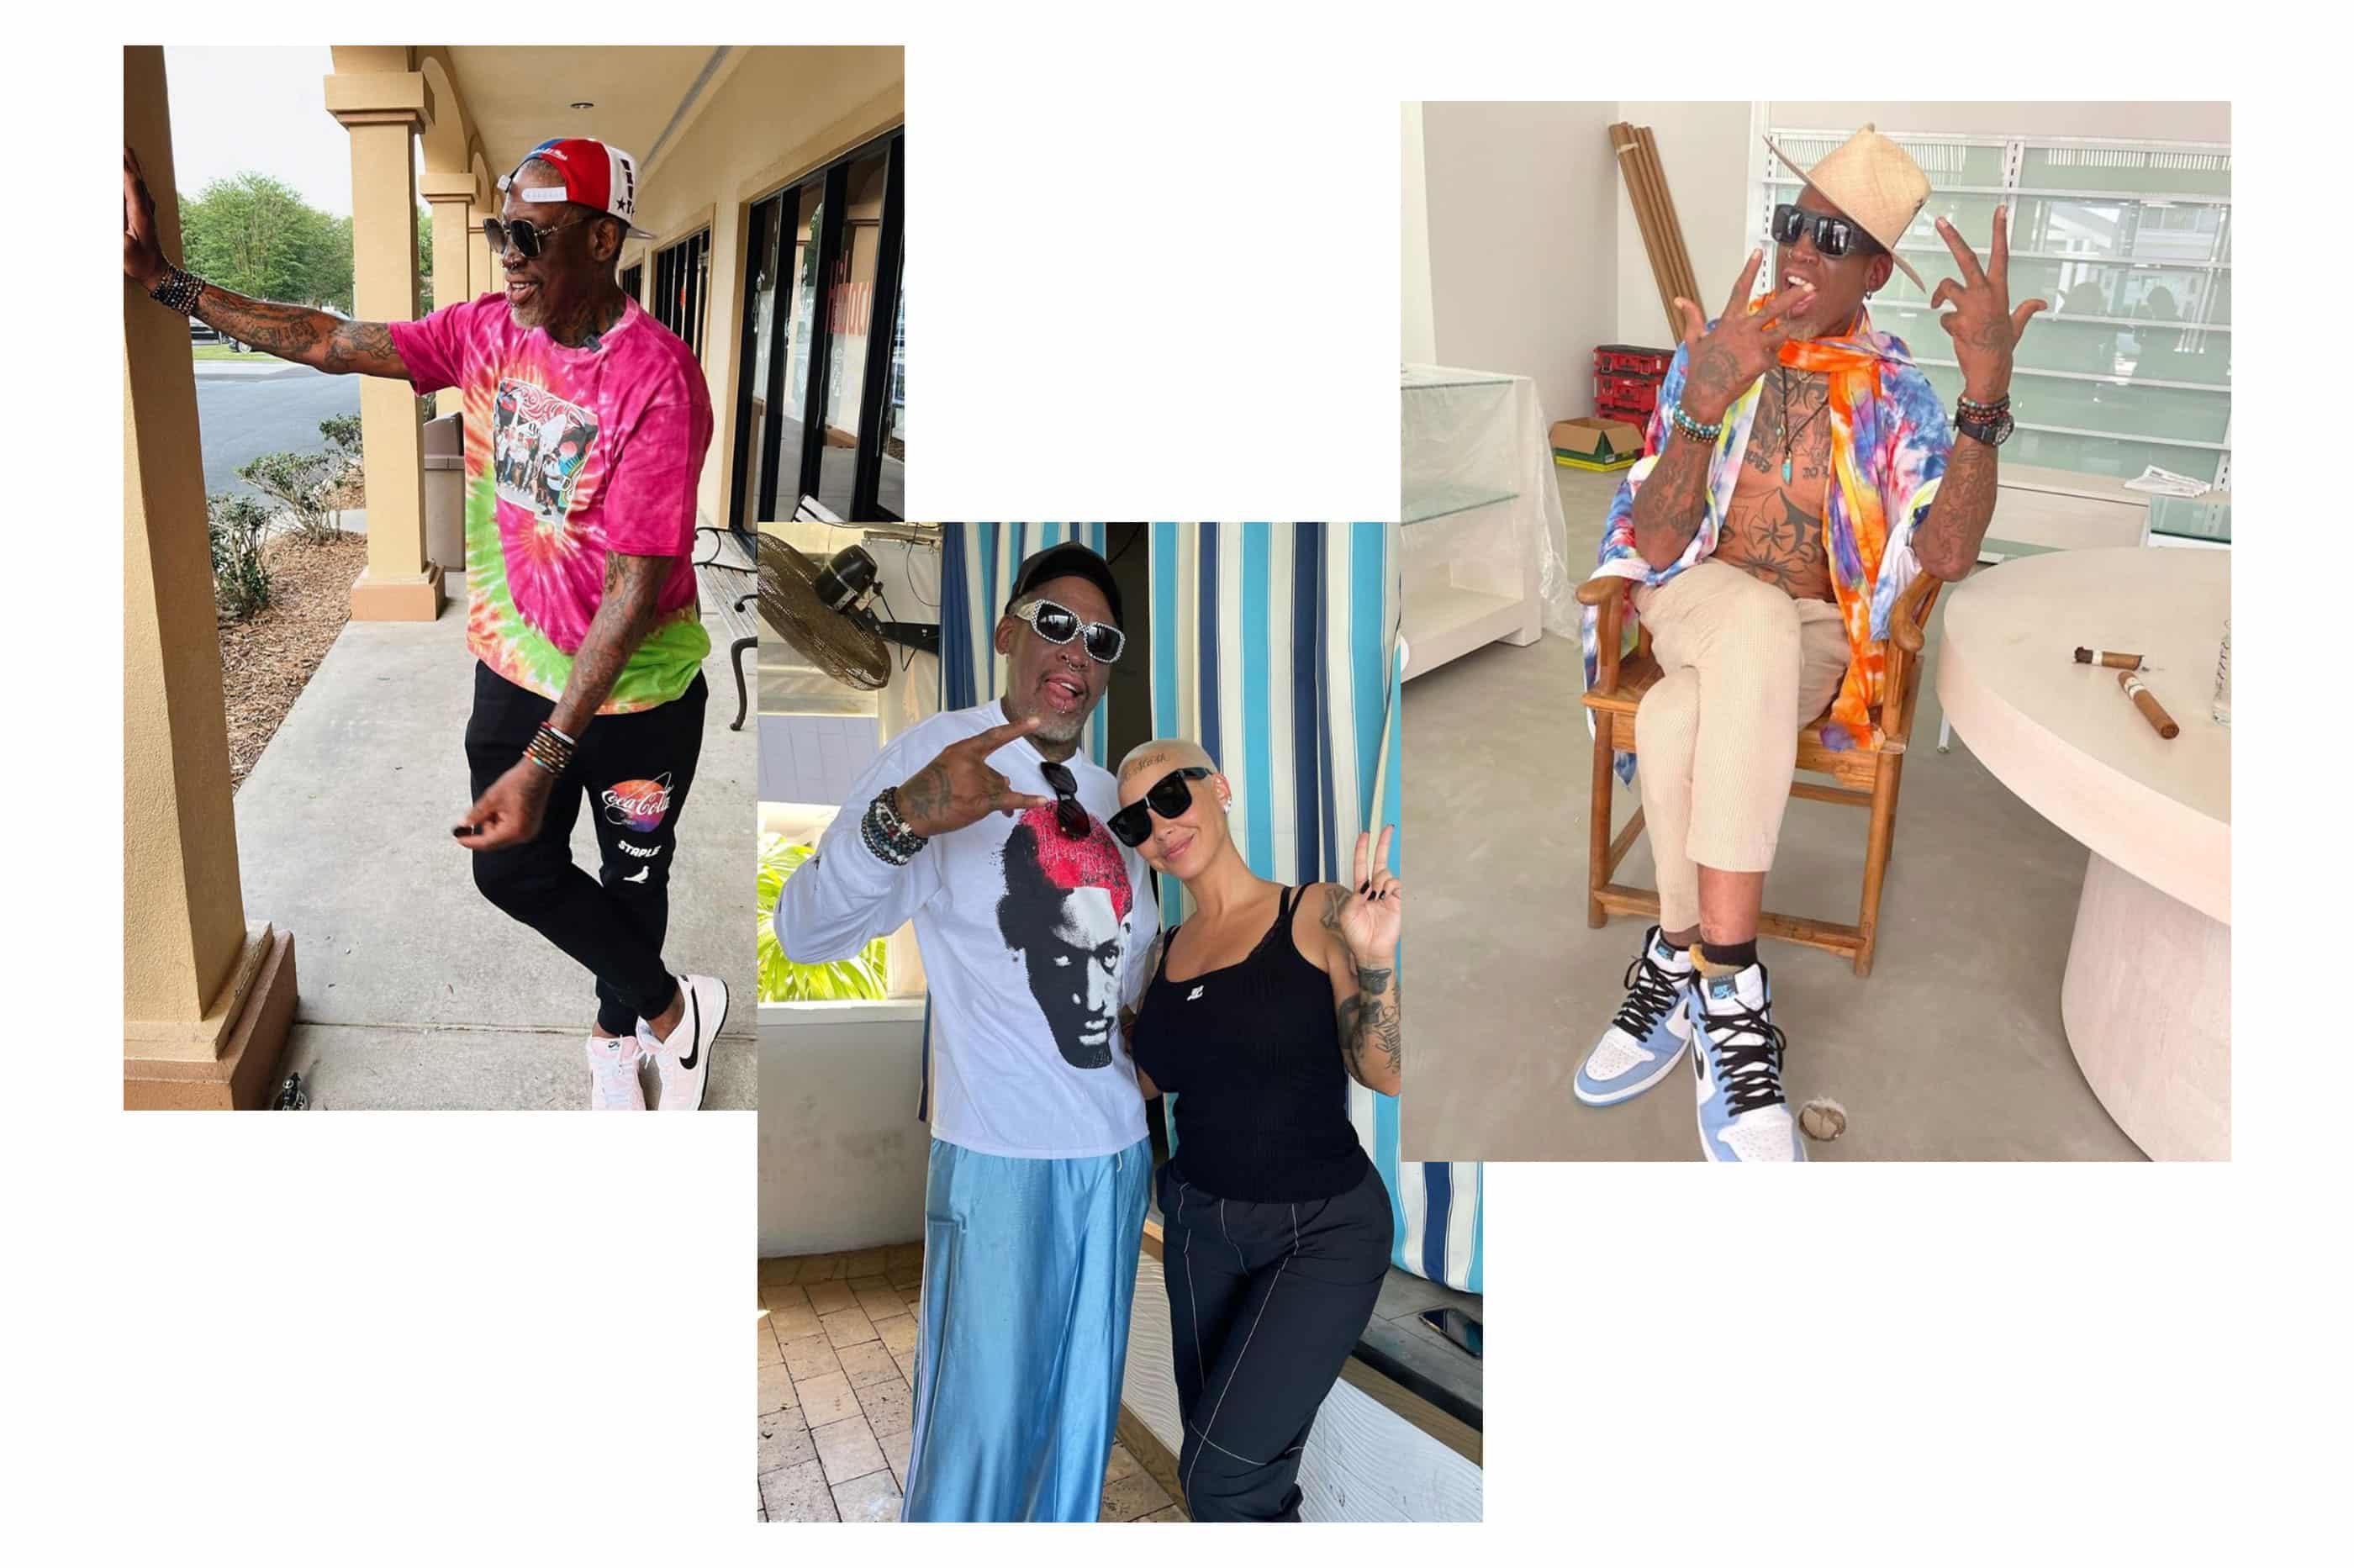 A Look at Dennis Rodman's Outrageous '90s Style